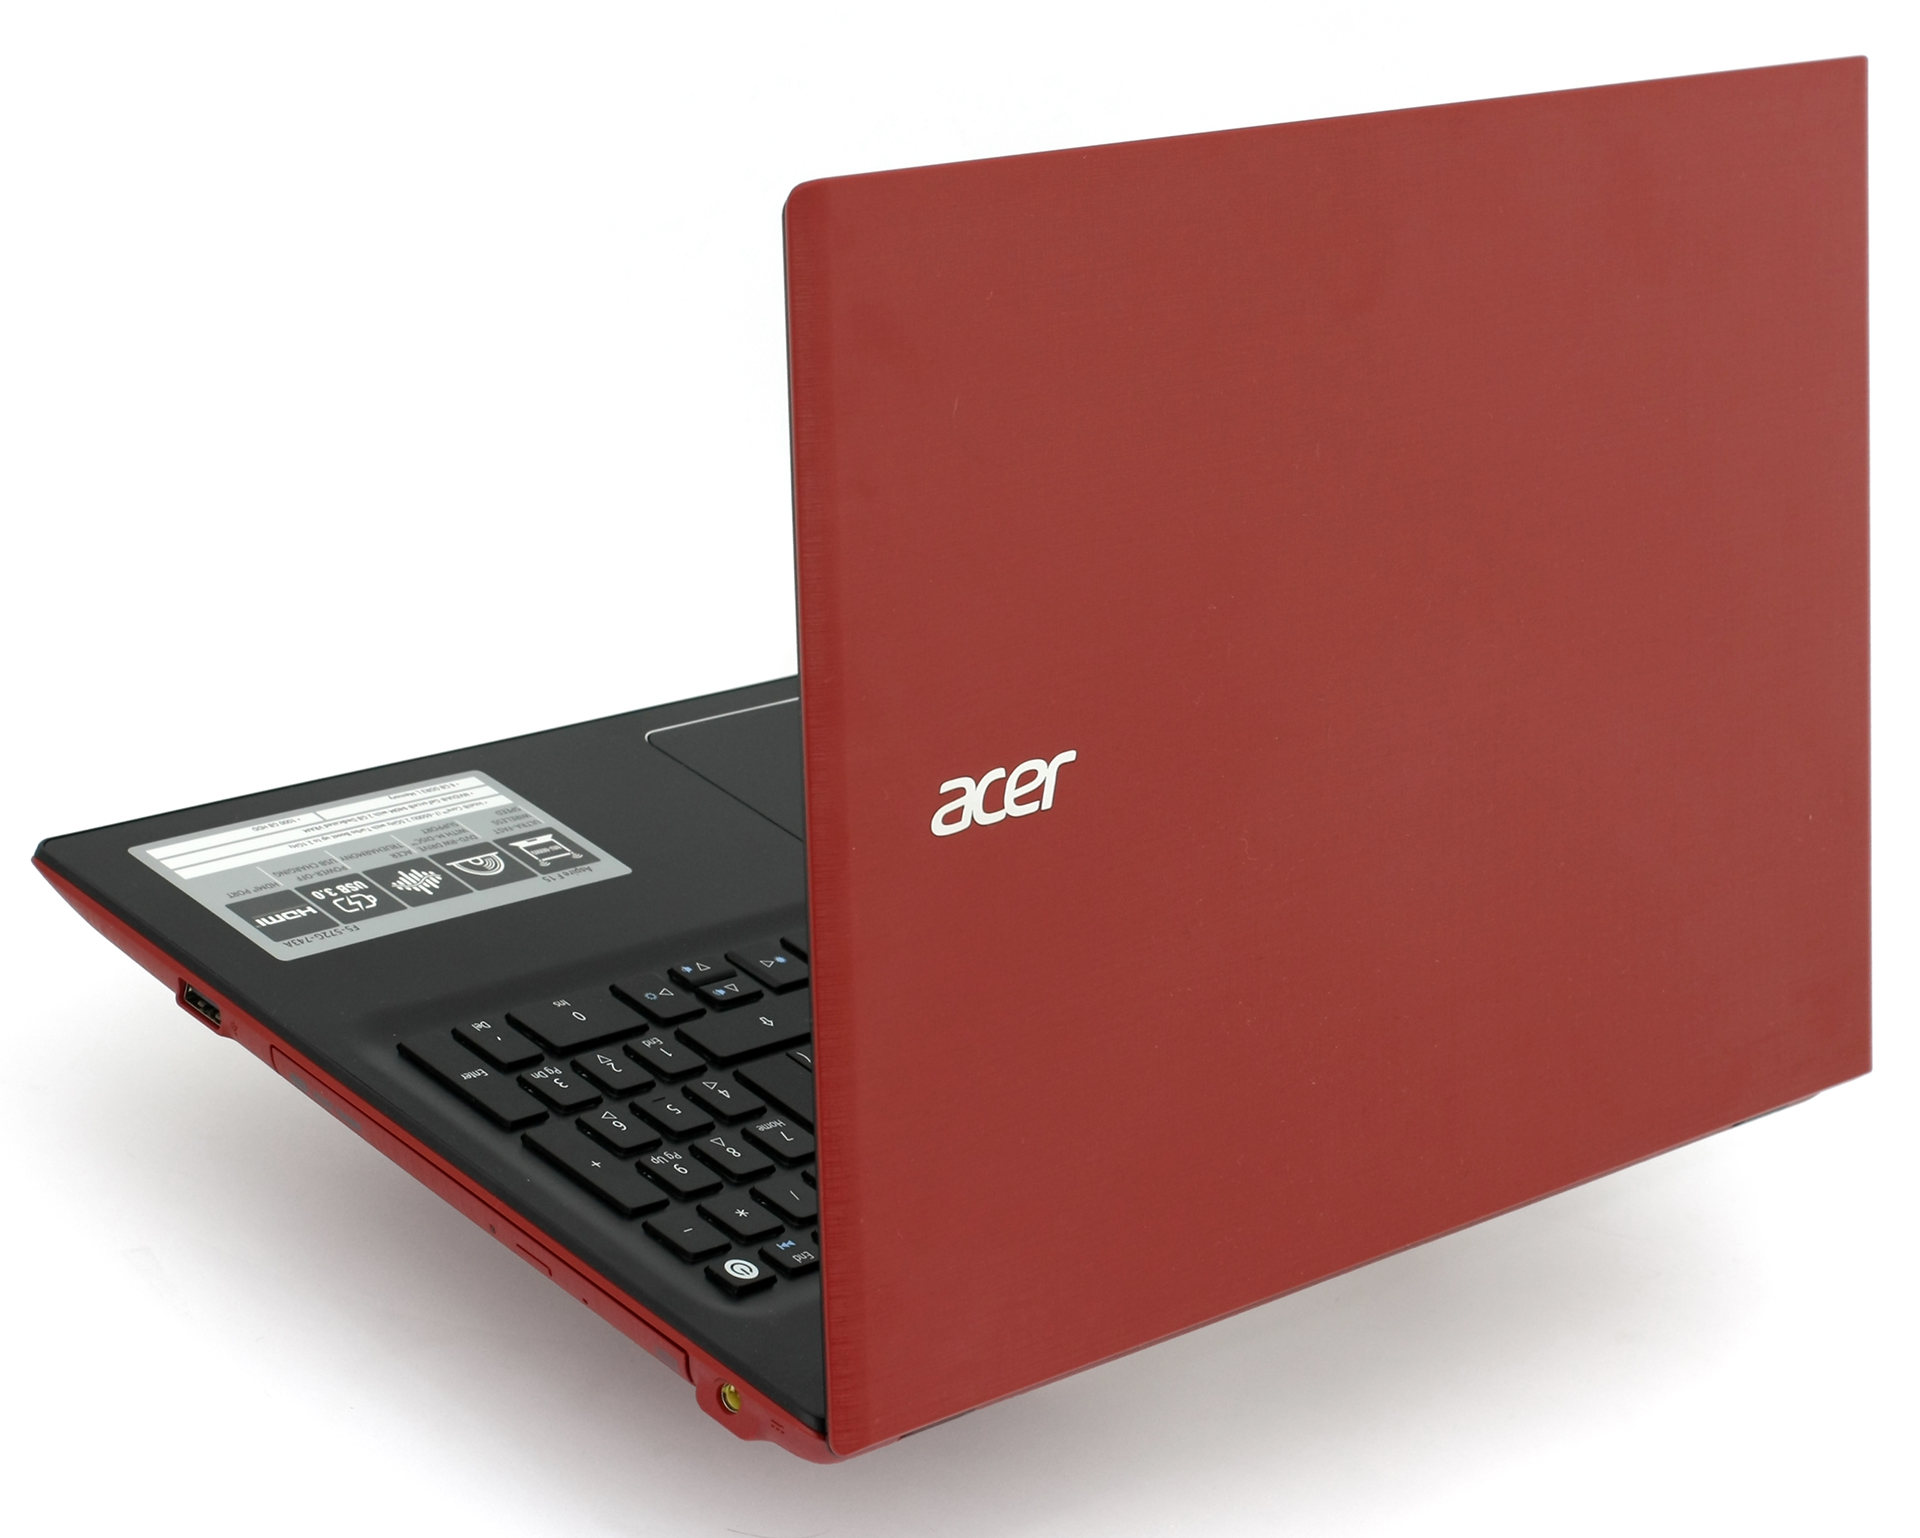 How To Screen Record On A Acer Laptop